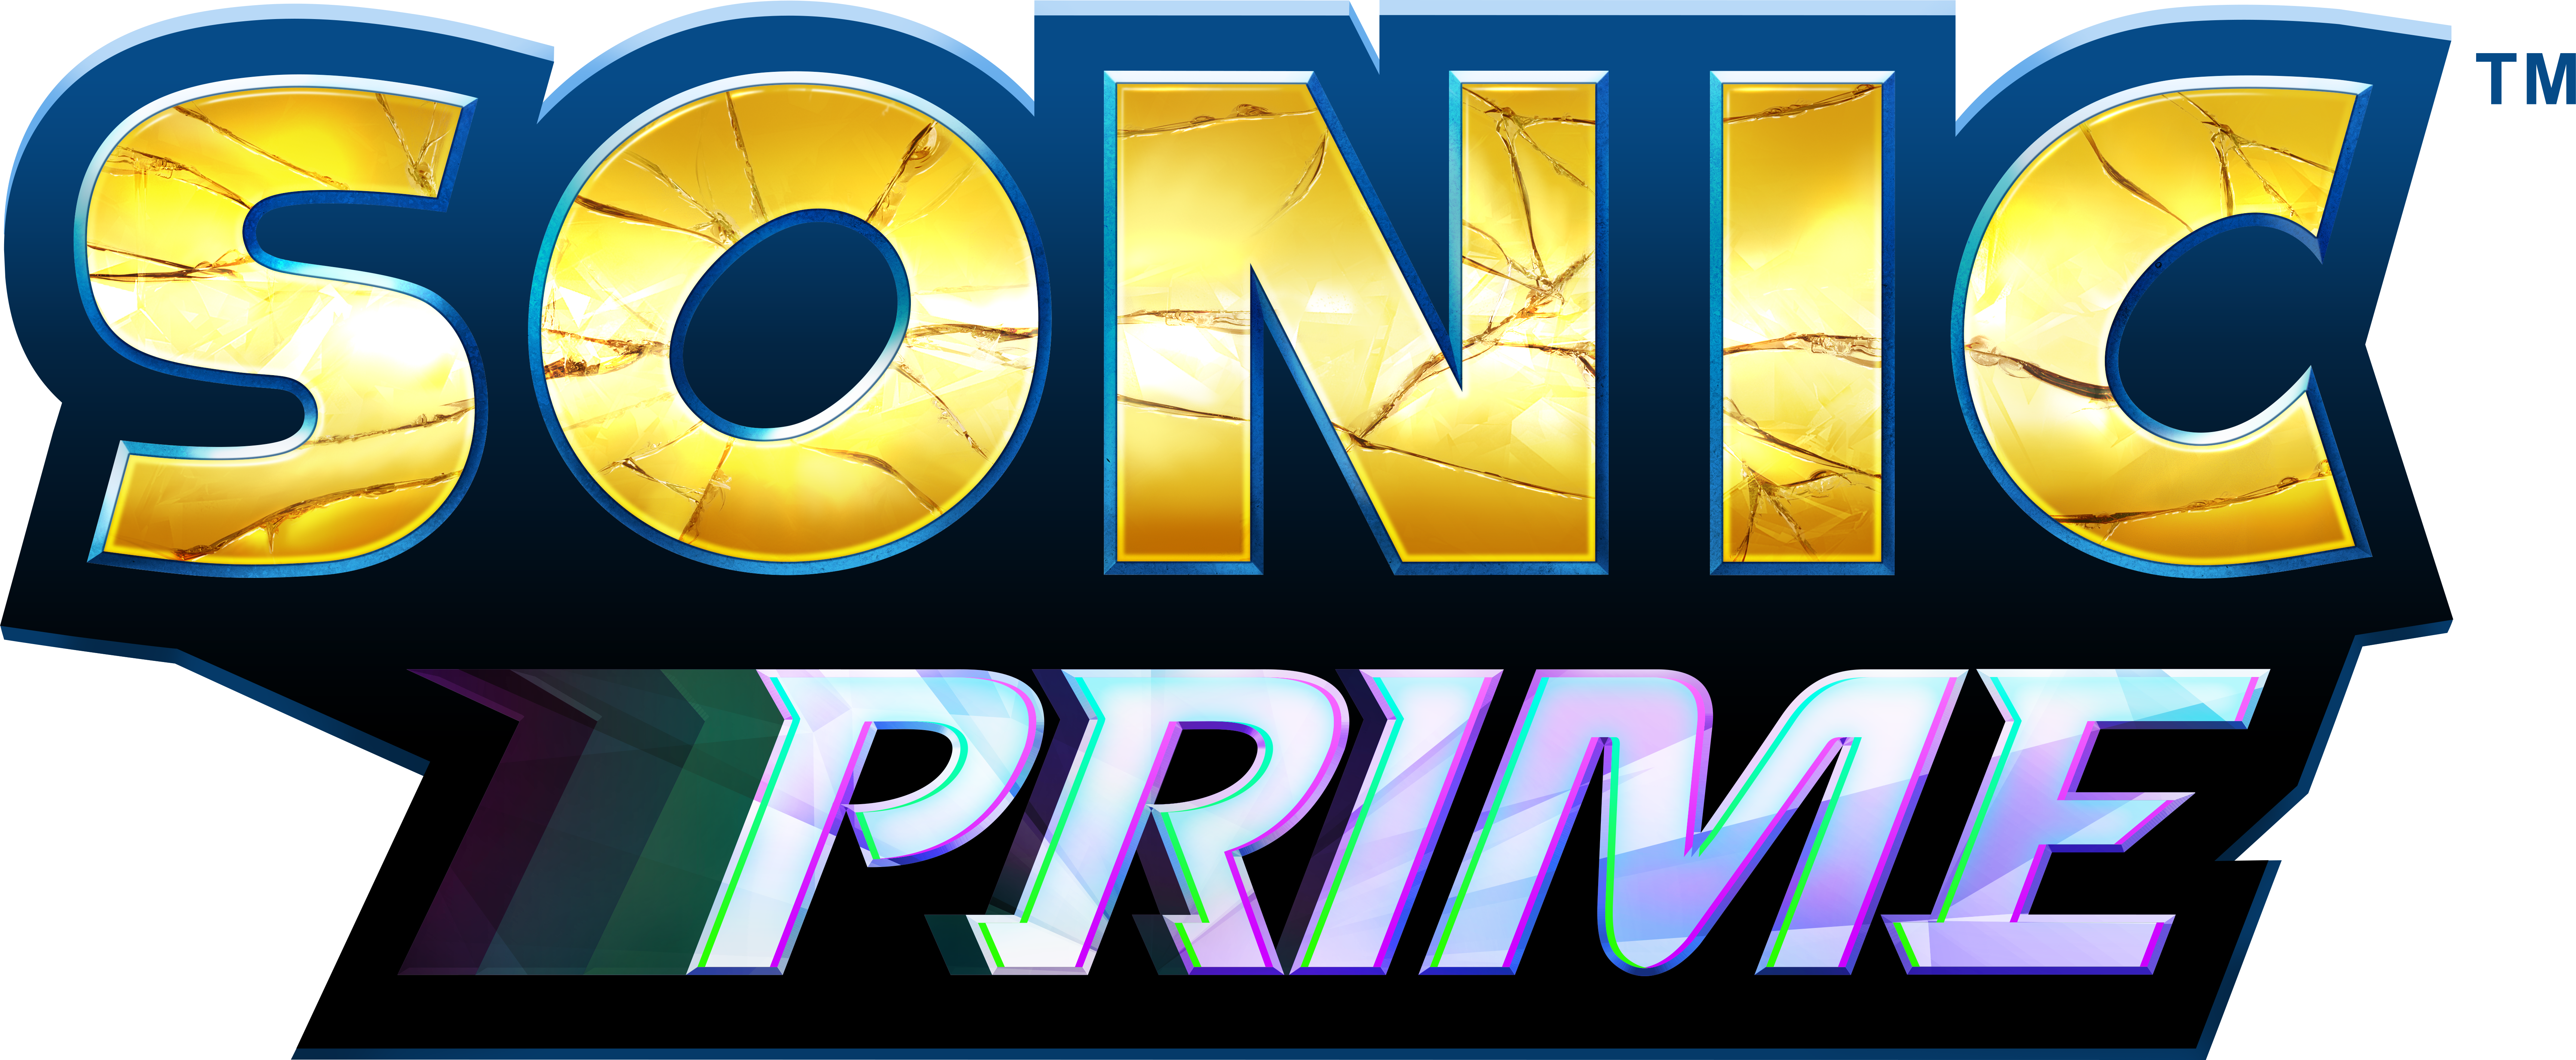 The First Episode Of 'Sonic Prime' Will Have An Astounding 40 Minute  Runtime — CultureSlate